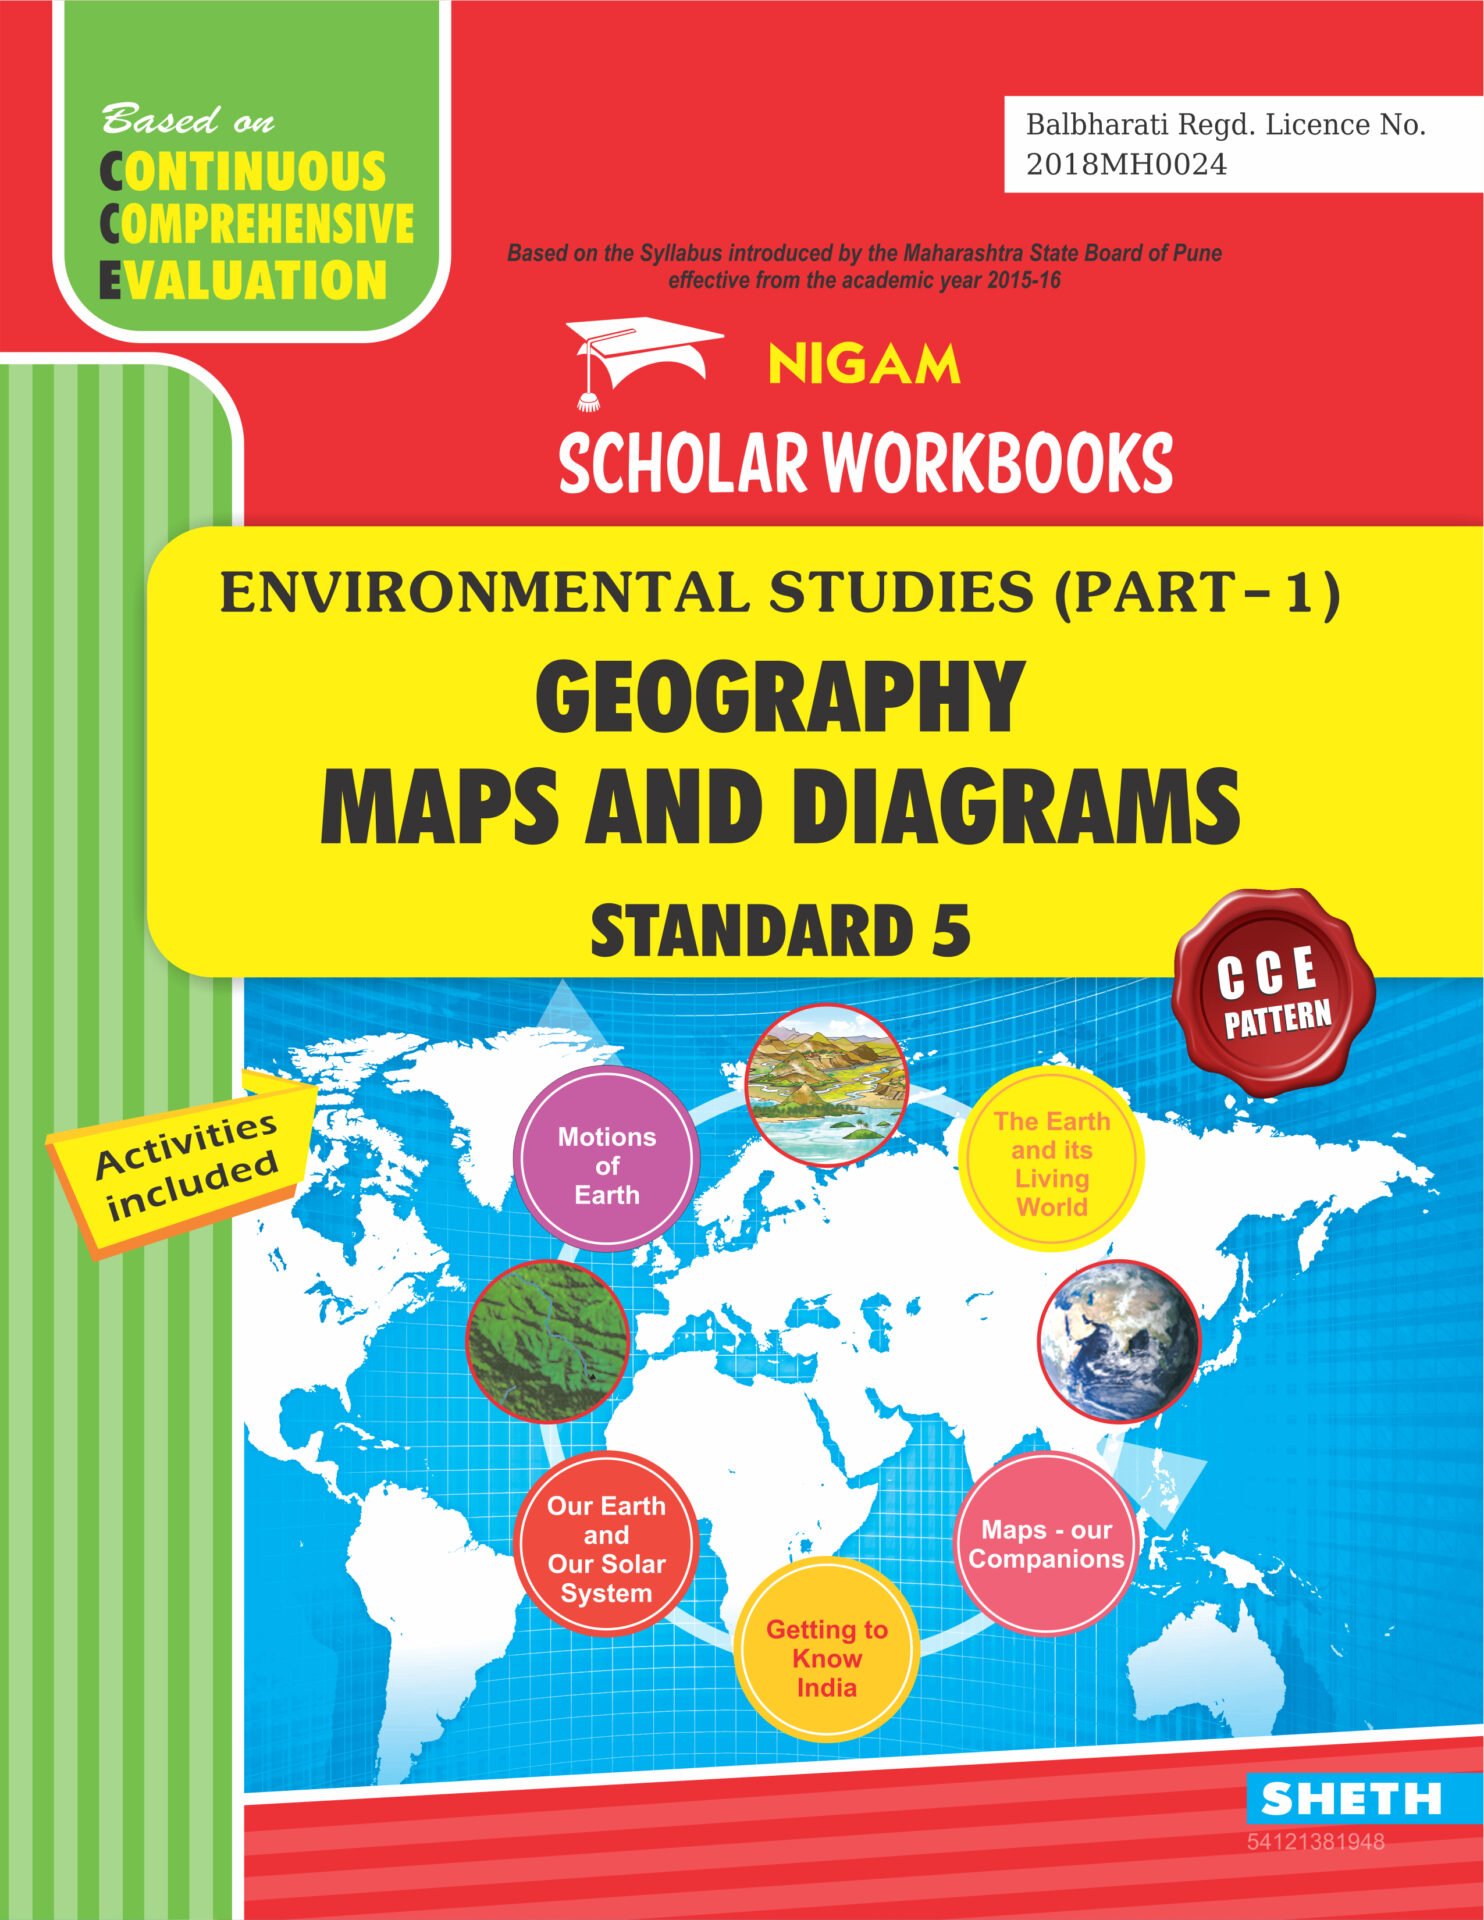 CCE Pattern Nigam Scholar Workbooks Geography Maps and Diagrams Standard 5 1